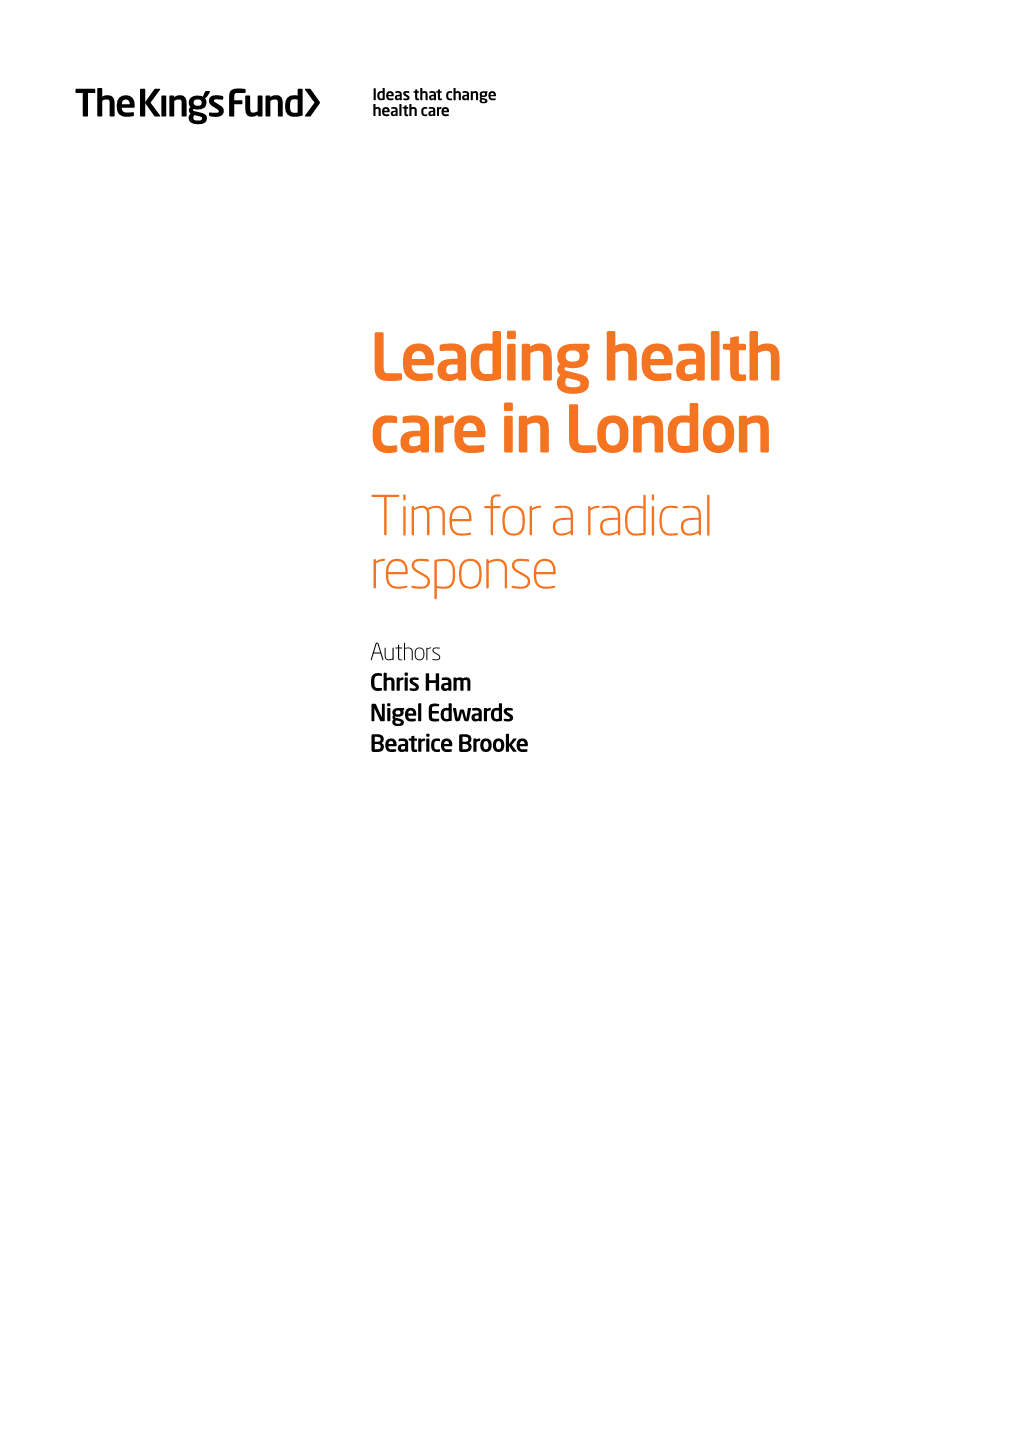 Leading Health Care in London Time for a Radical Response